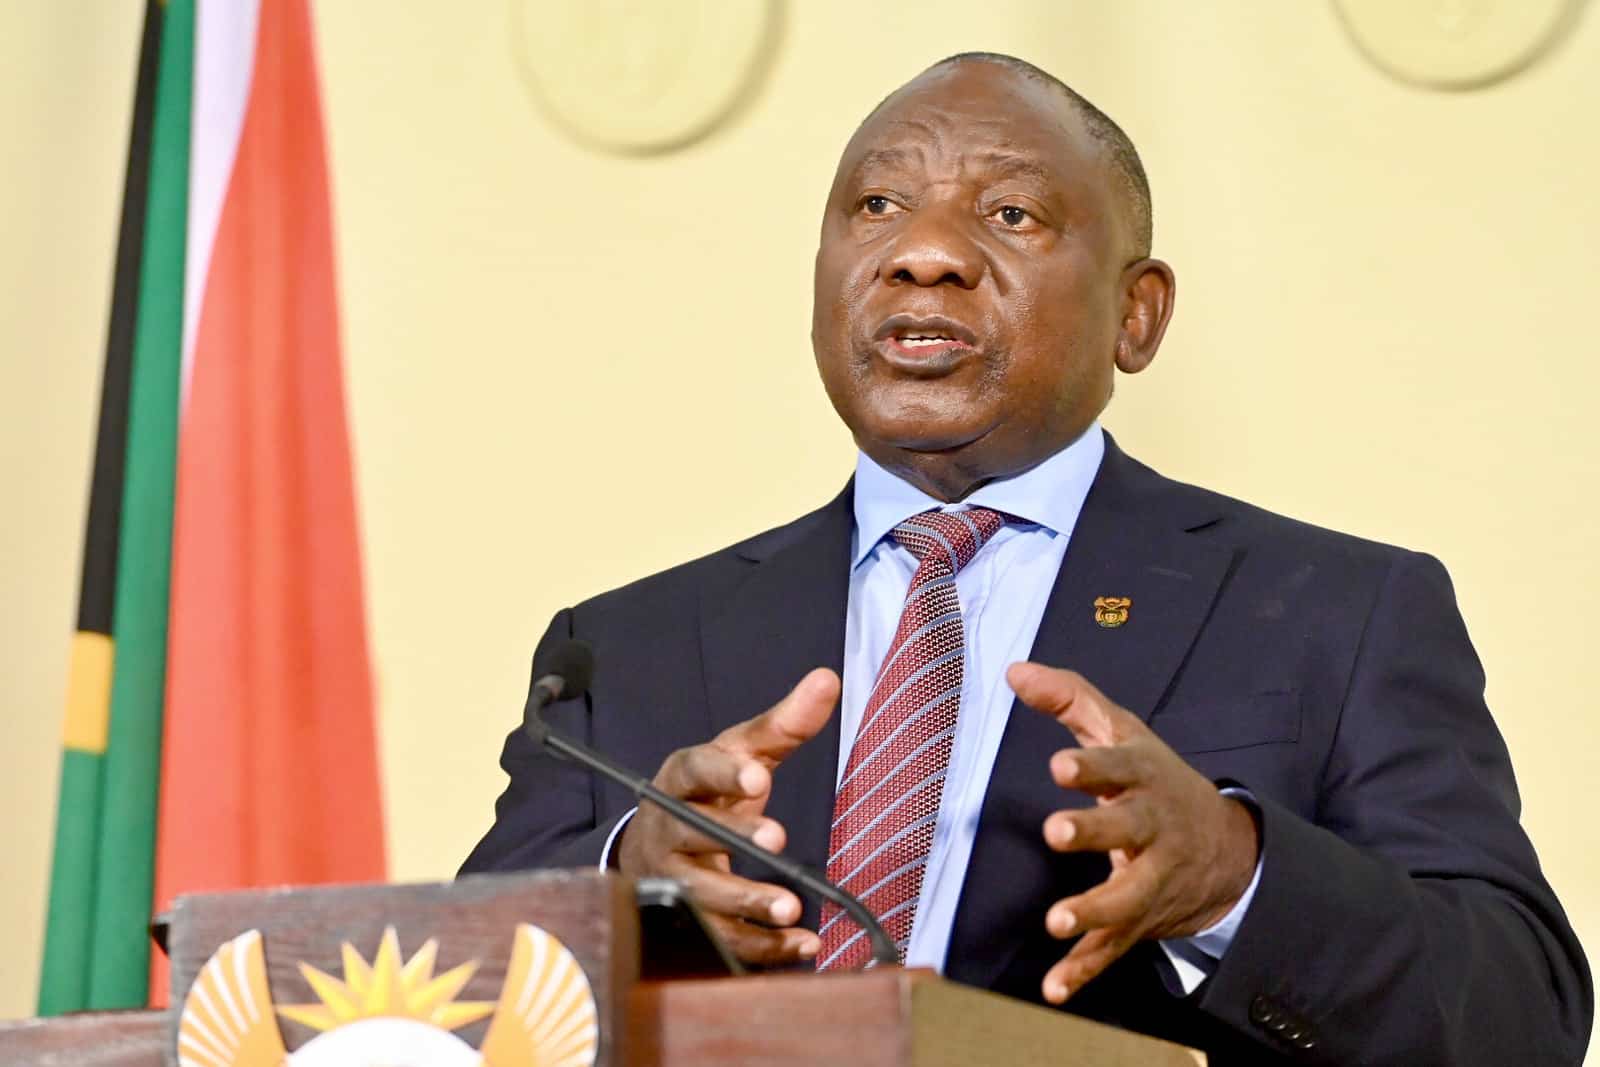 Crimes being committed by groups as cover up for looting- says Ramaphosa; vows to deal with the bad elements